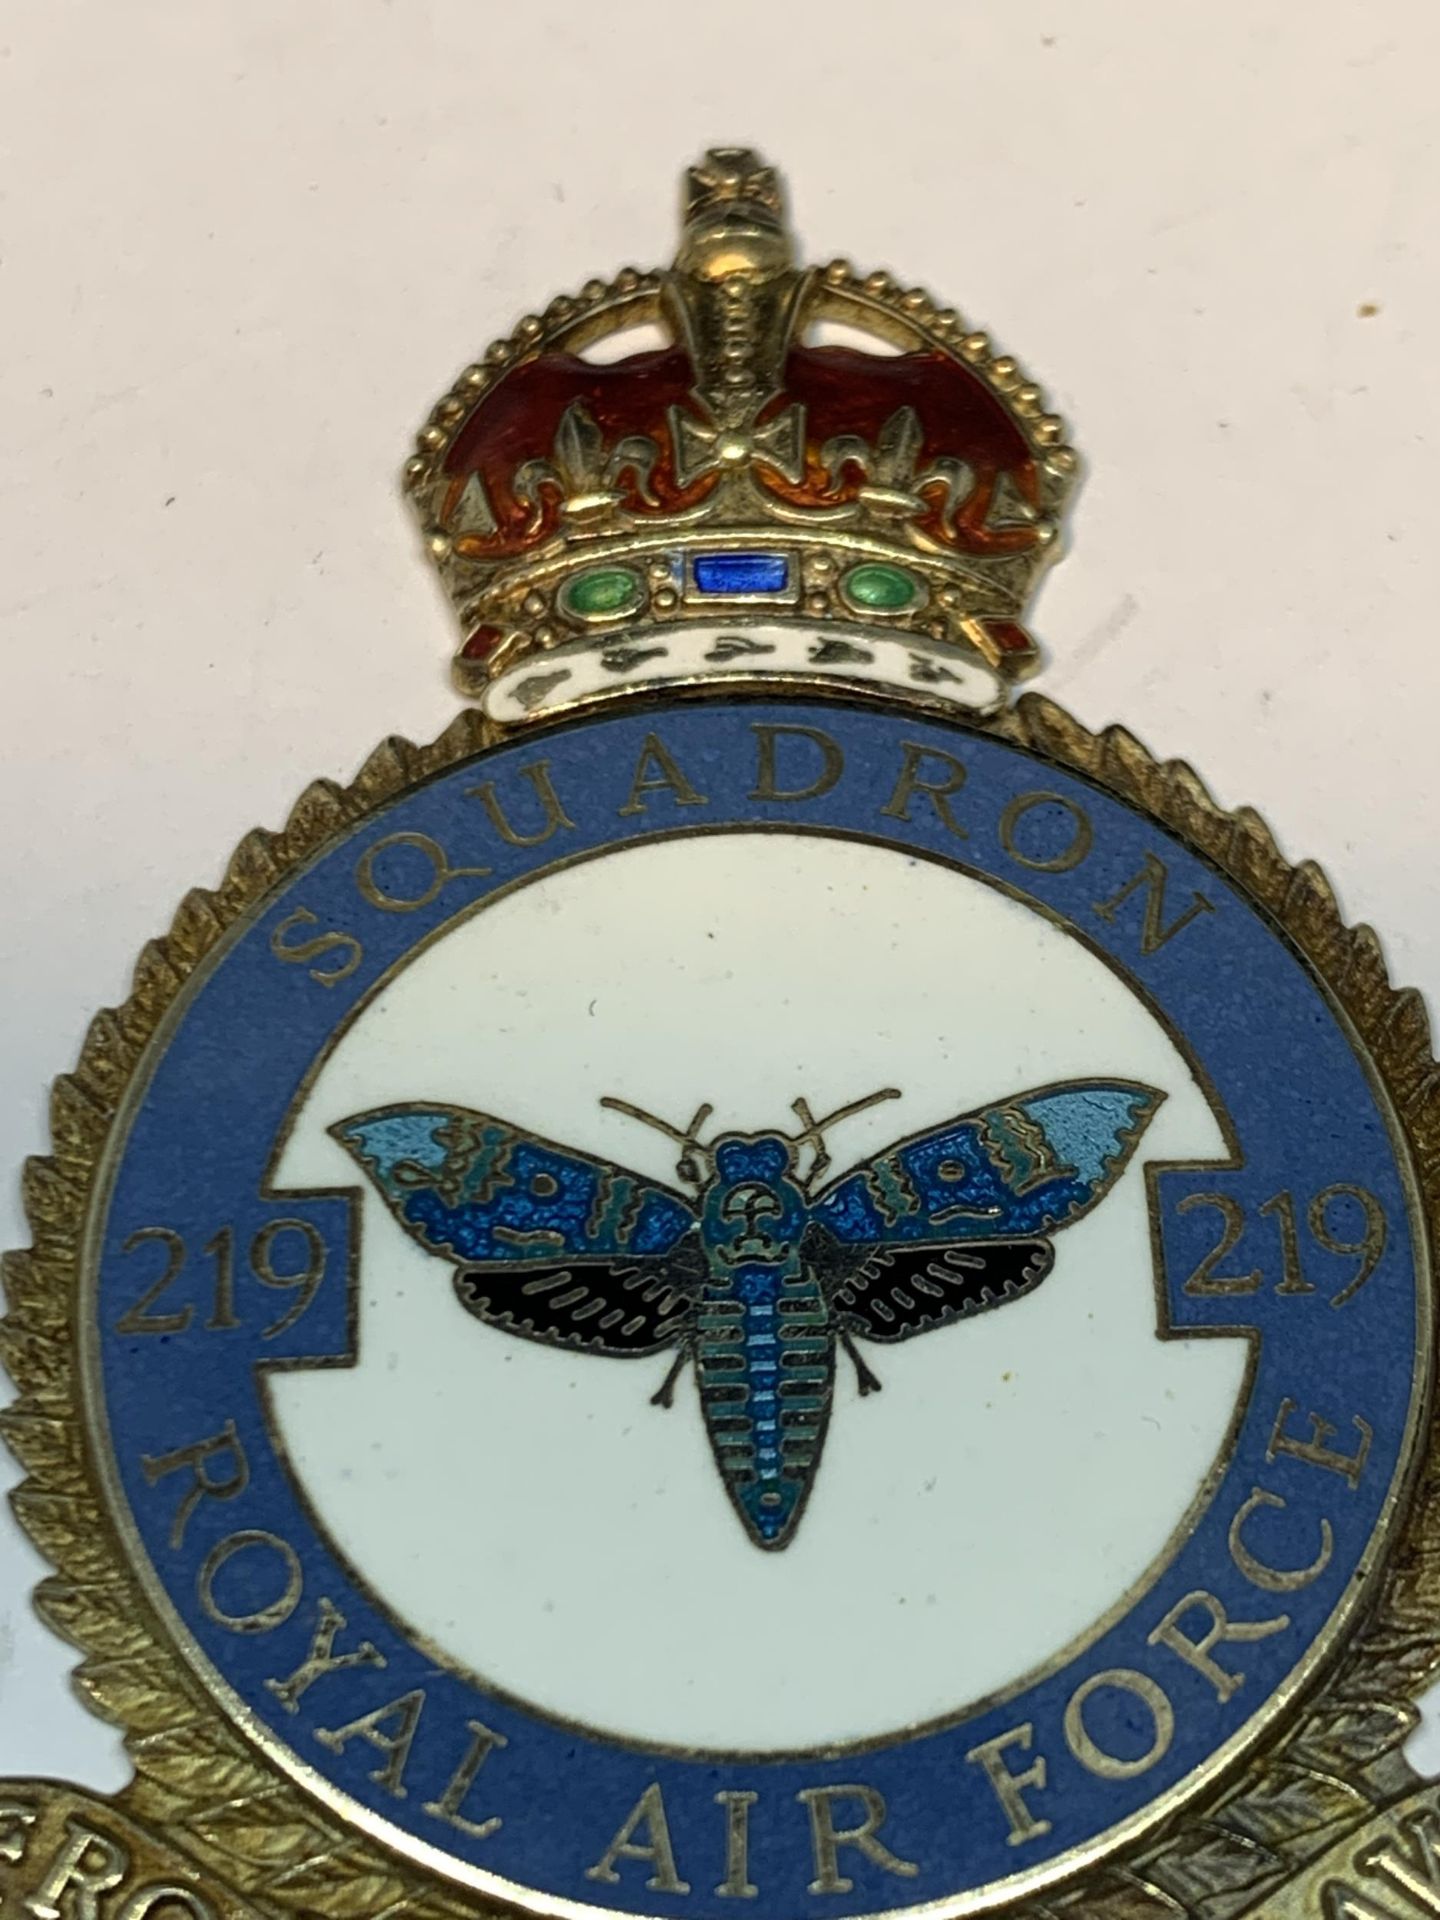 A HALLMARKED BIRMINGHAM SILVER ROYAL AIRFORCE SQUADRON 219 FROM DUSK TILL DAWN BADGE - Image 2 of 4